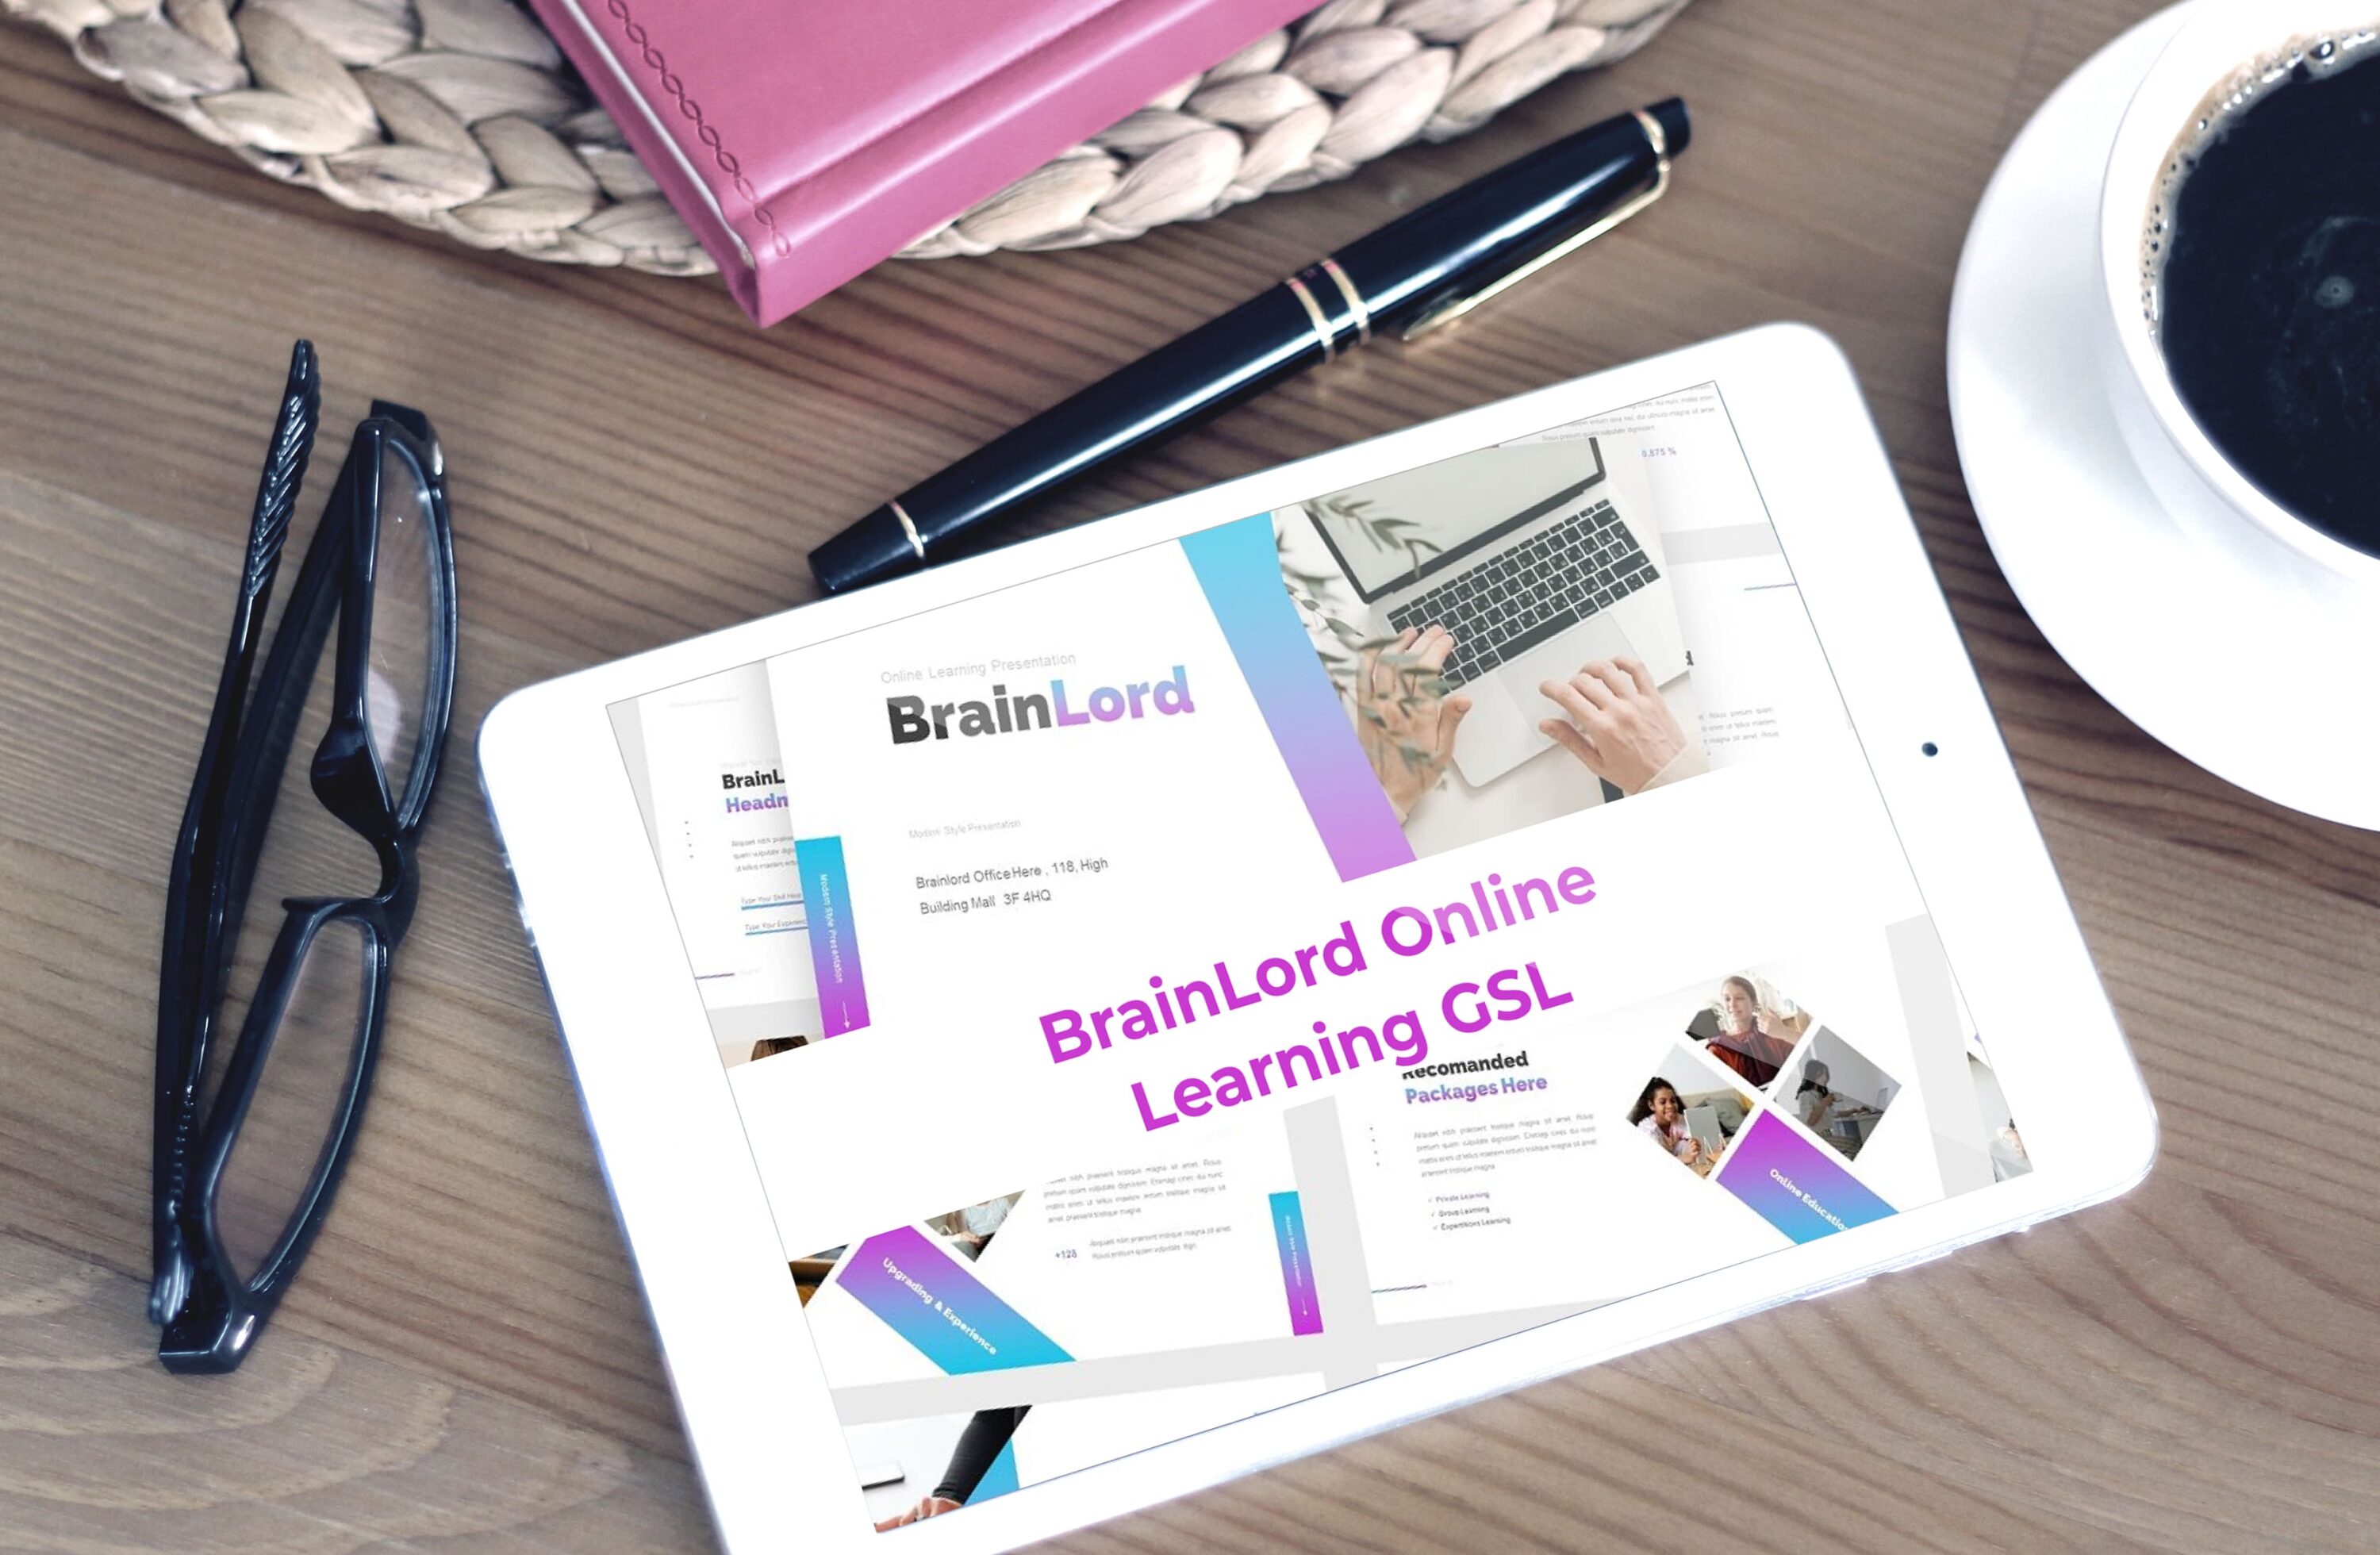 BrainLord Online Learning GSL - Mockup on Tablet.